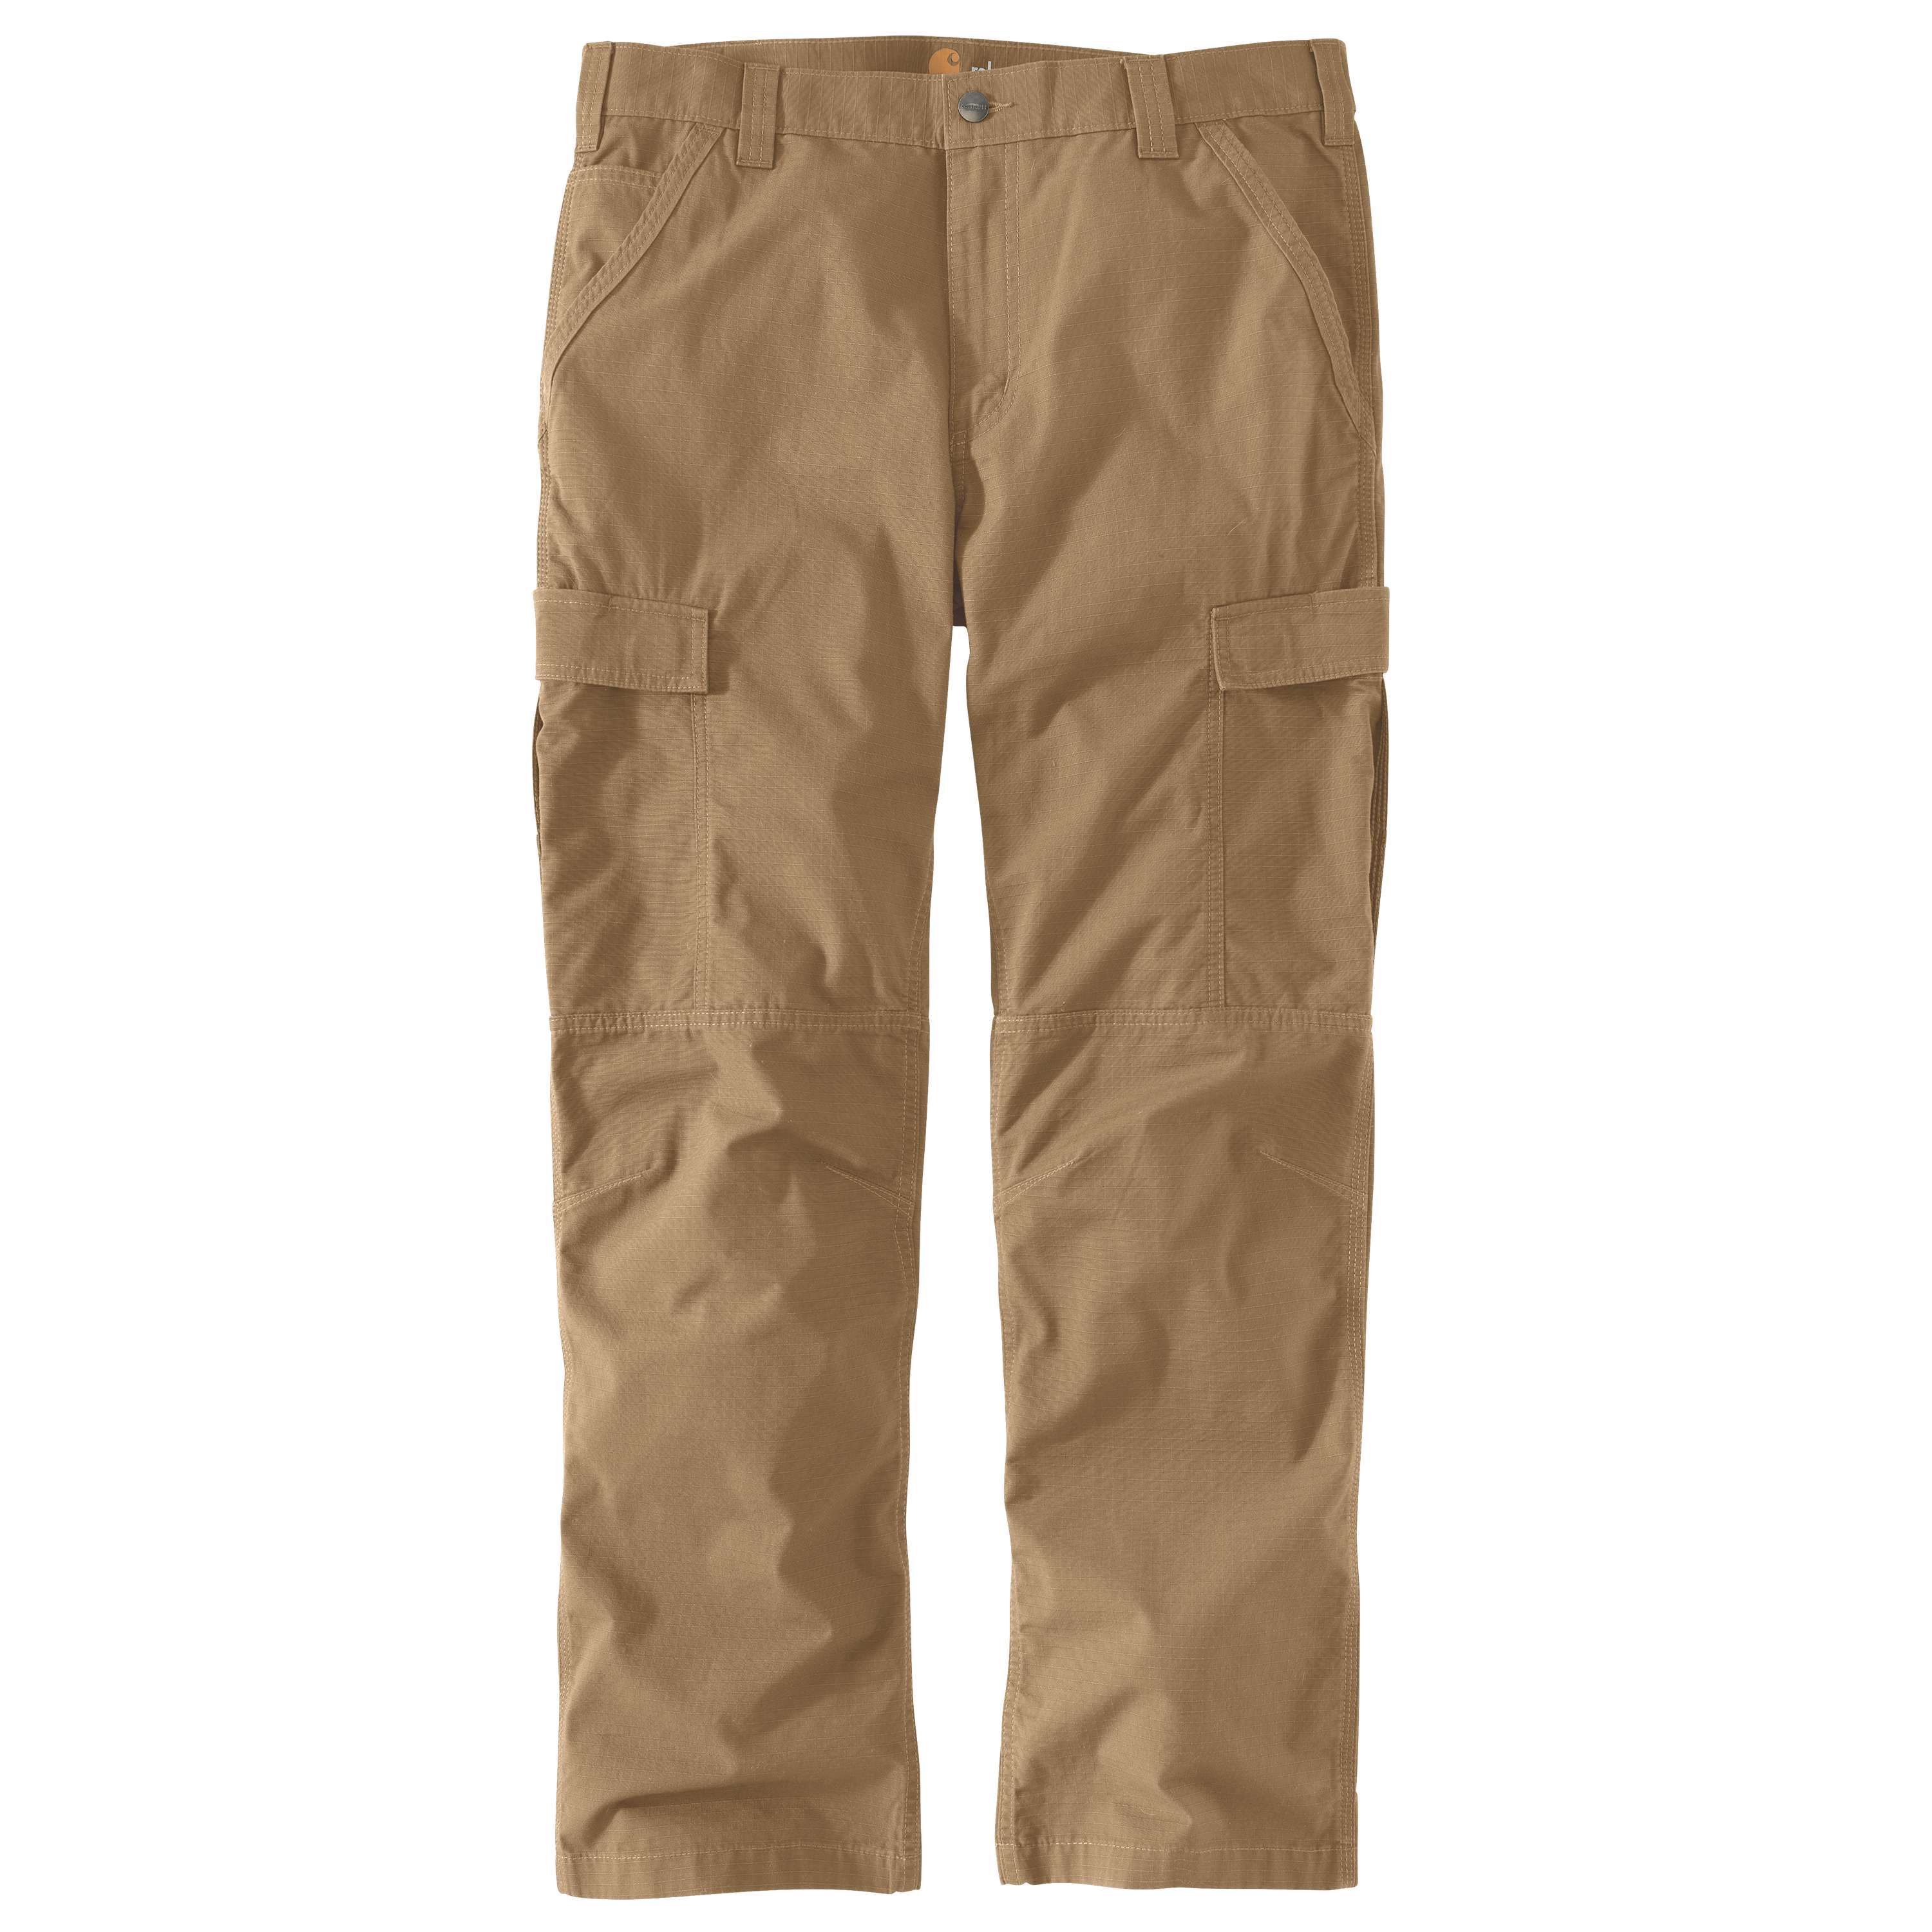 CARHARTT FORCE™ RELAXED FIT RIPSTOP CARGO WORK PANT